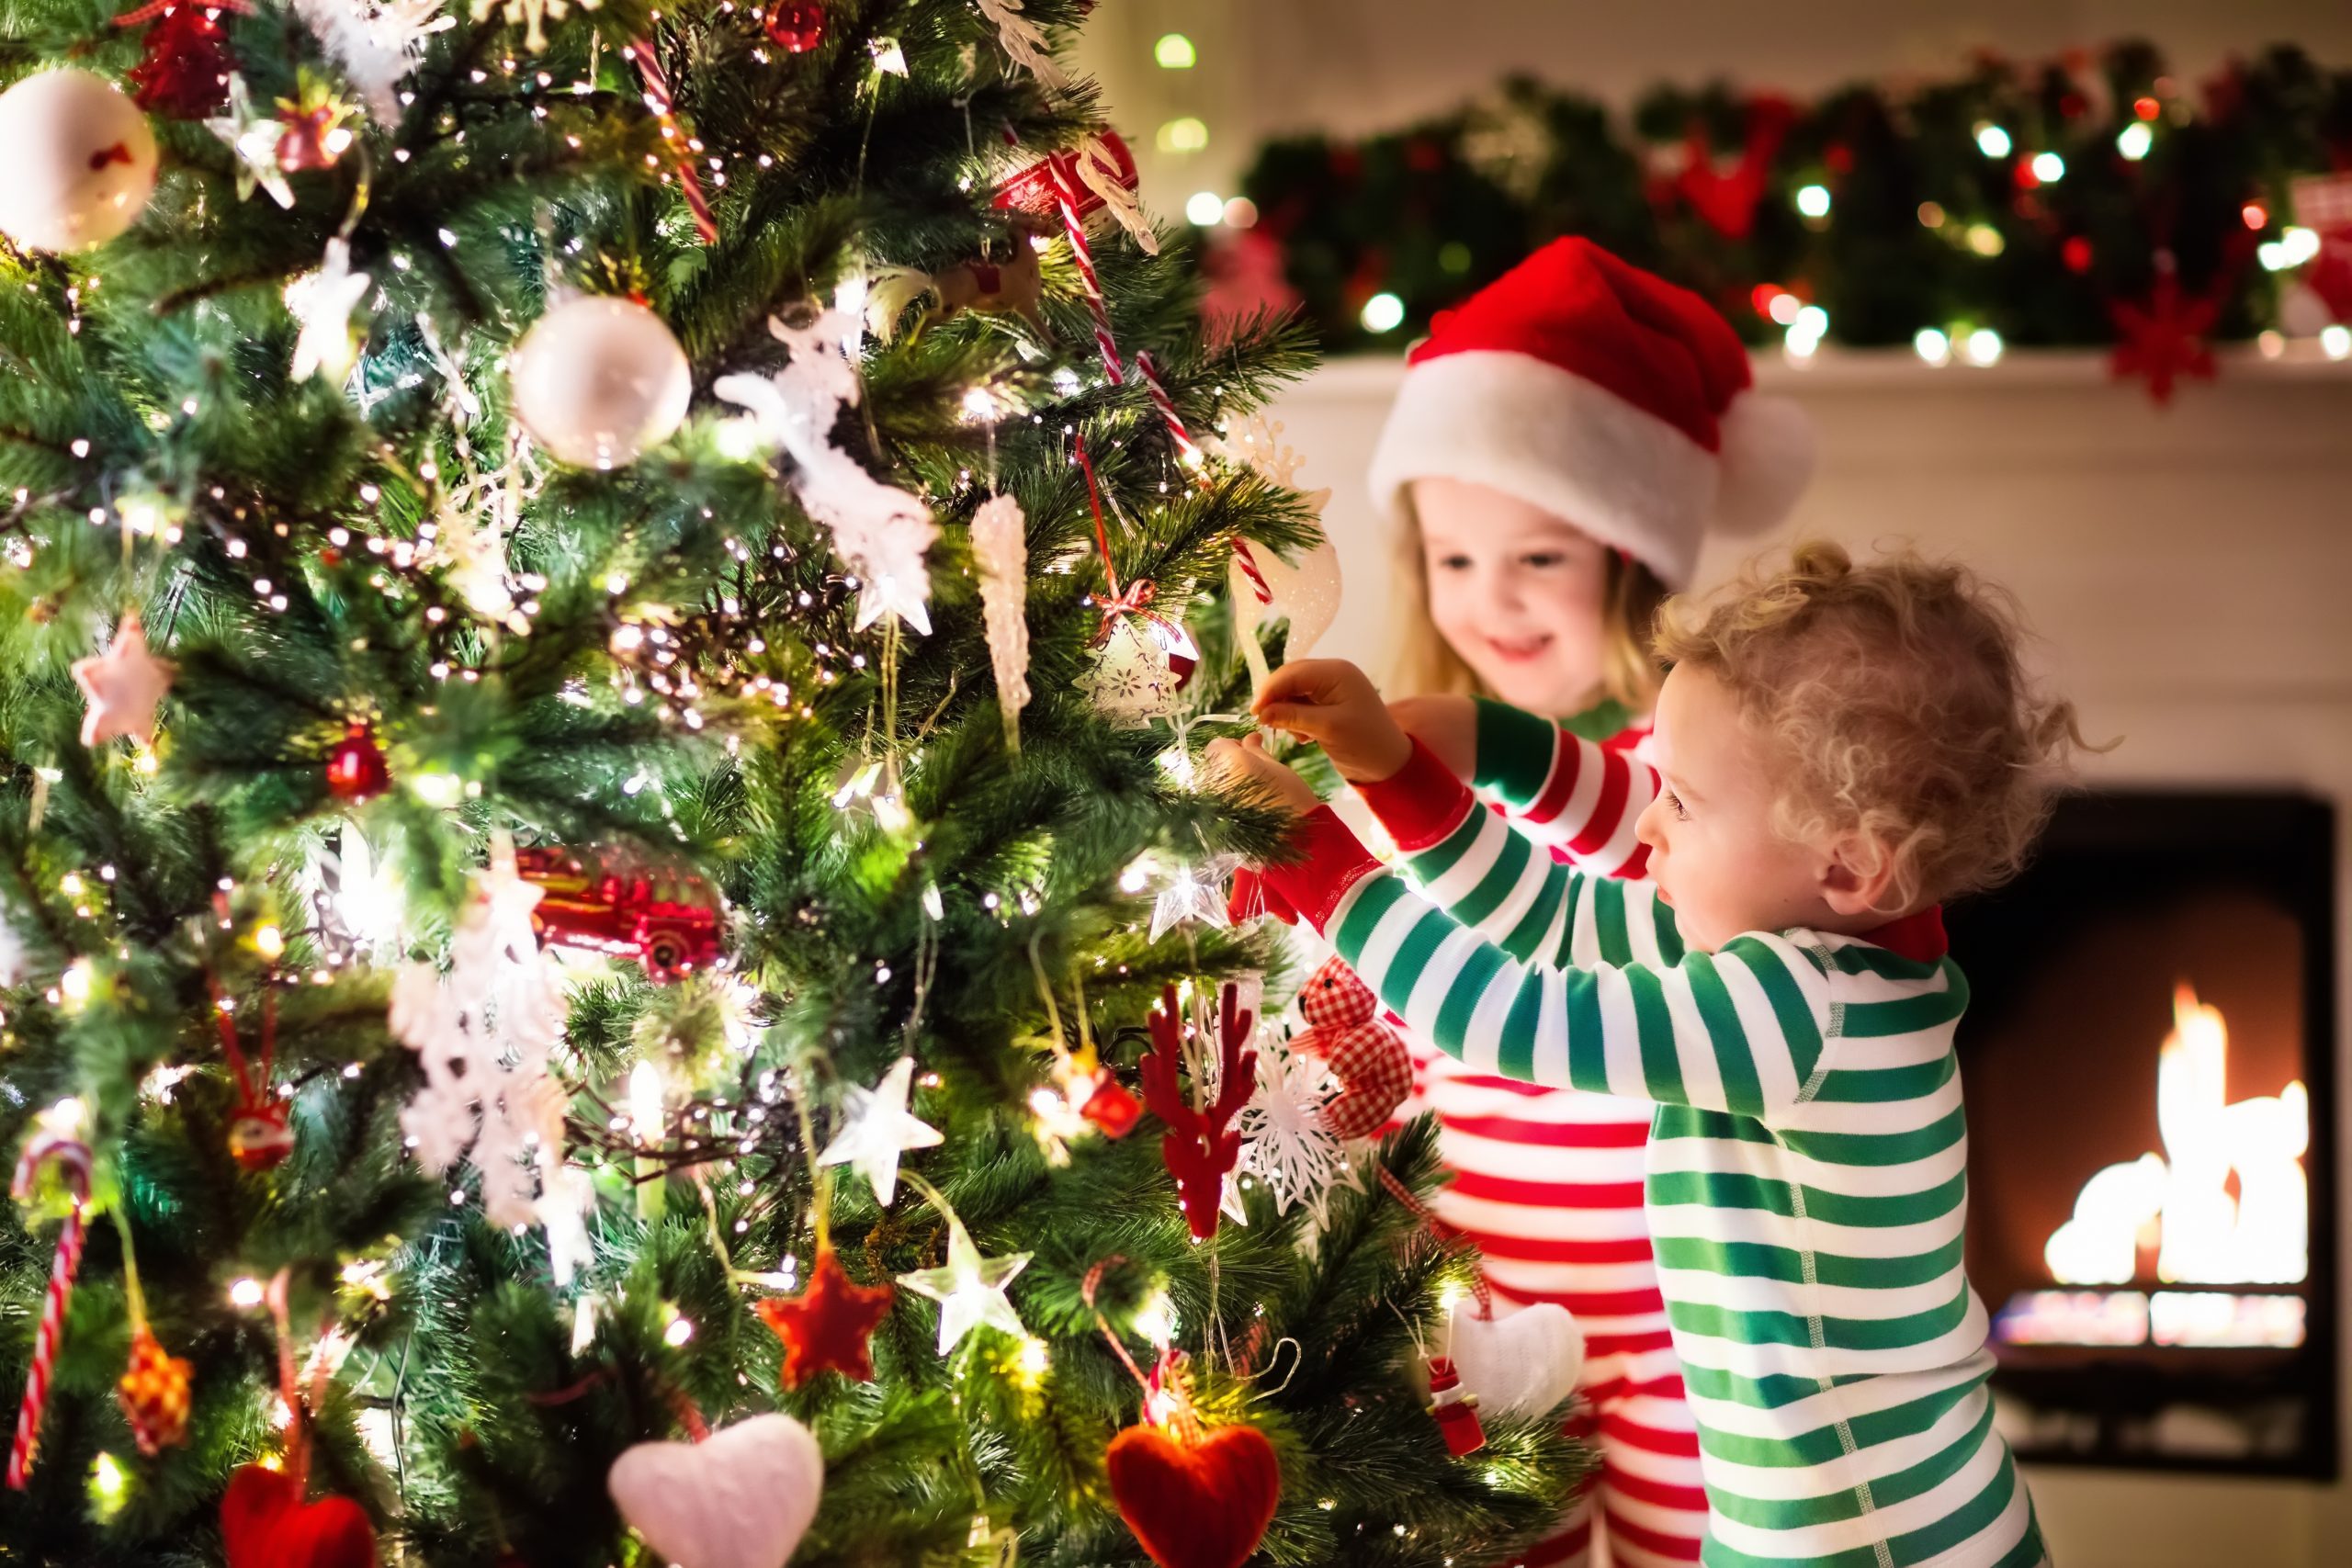 TOP TIPS ON CELEBRATING A GREENER AND MORE SUSTAINABLE CHRISTMAS